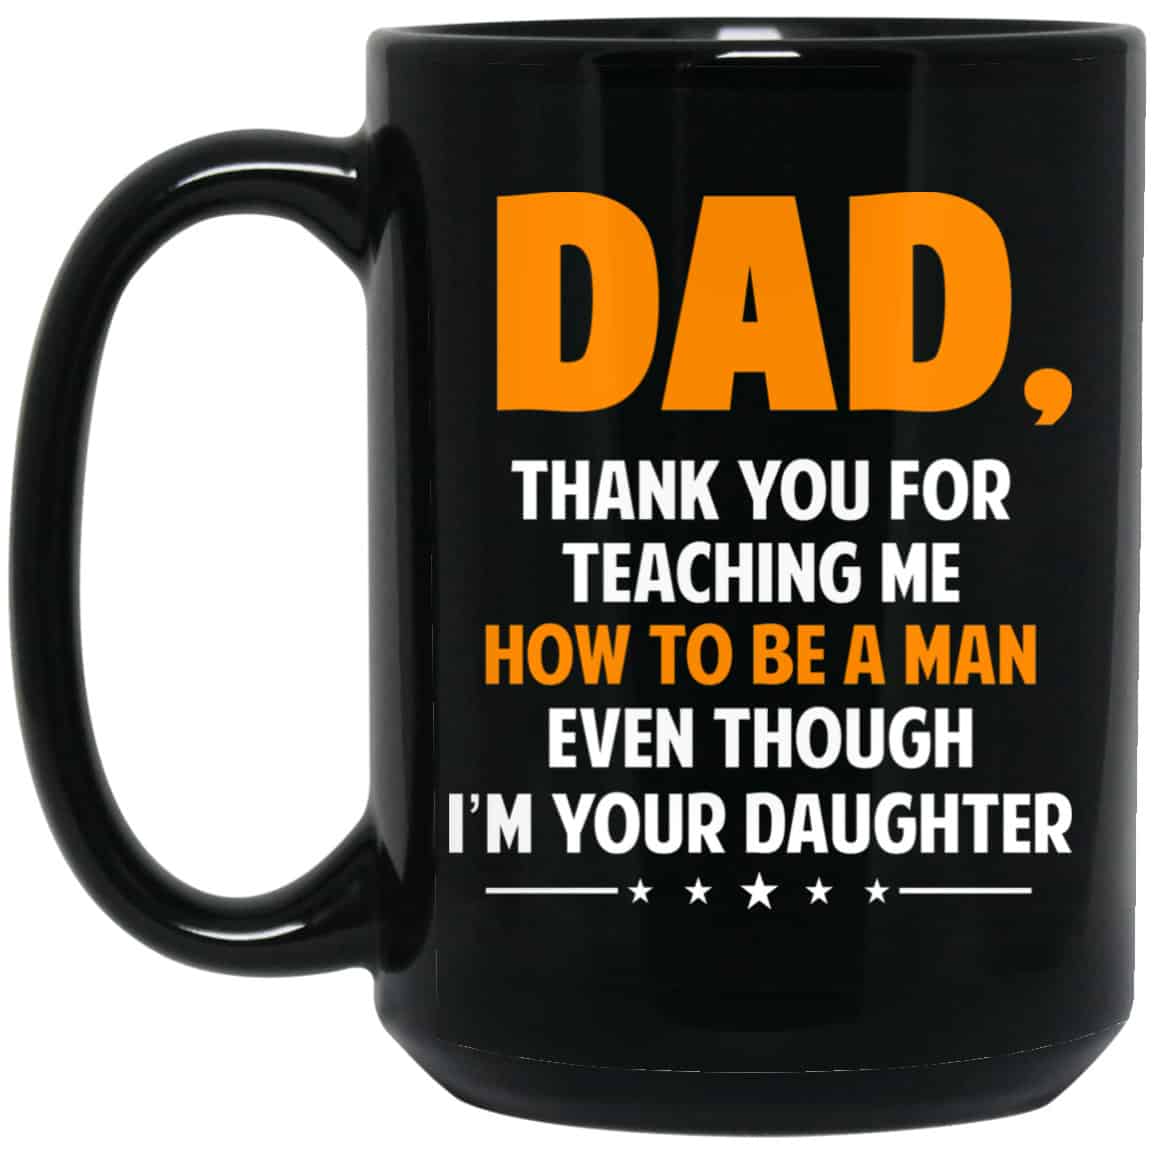 A Man Even Though I'm Gift Coffee Mug Dad Thank You For Teaching Me How To Be 